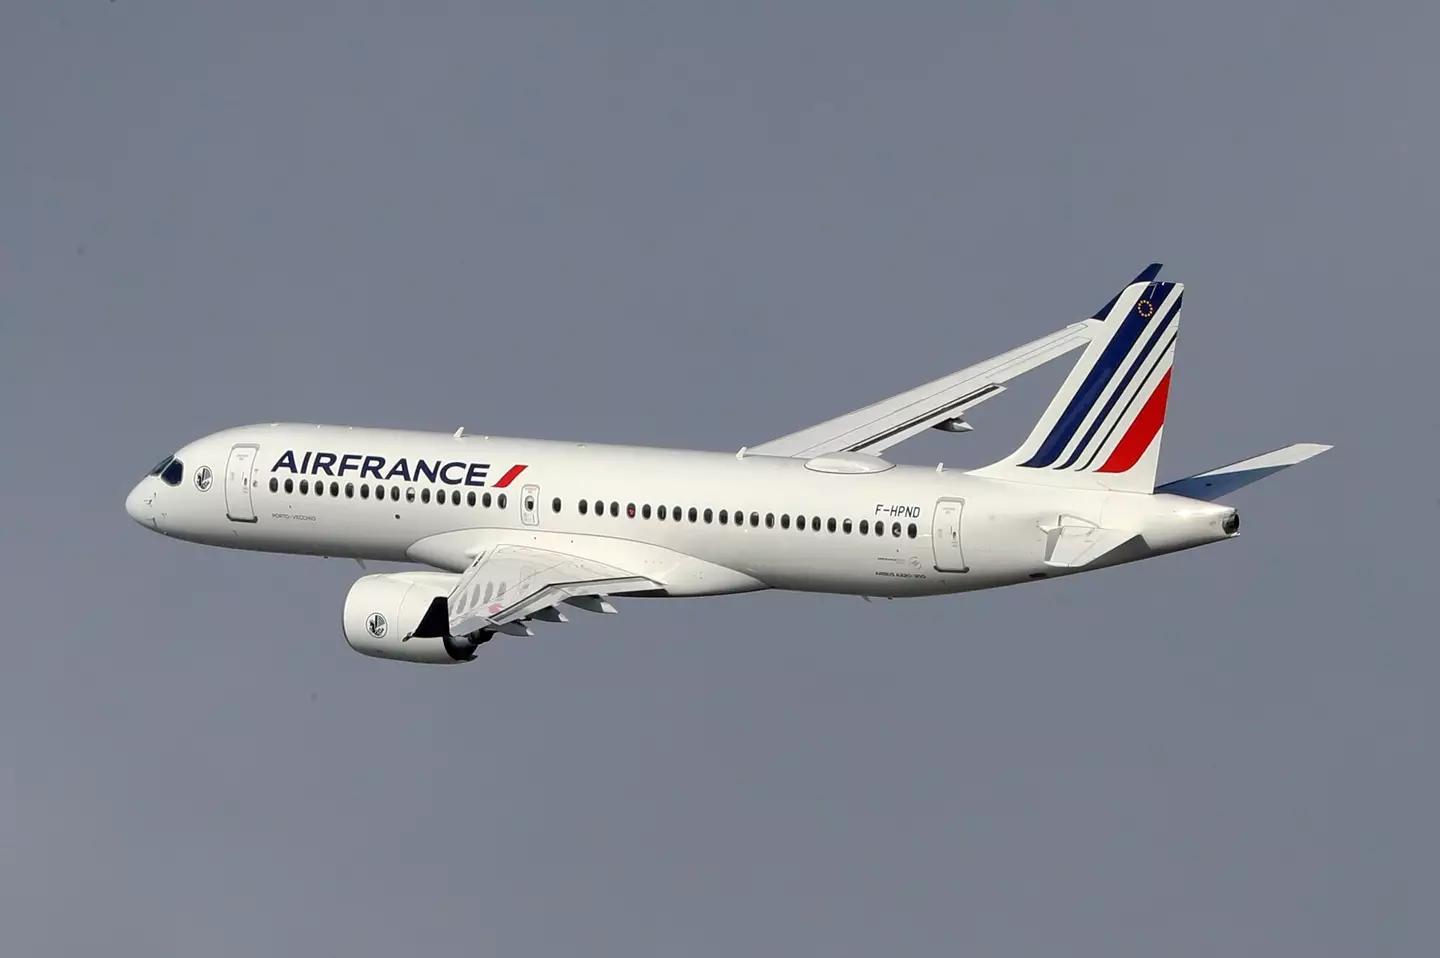 Air France operated the aircraft. (Urbanandsport/NurPhoto via Getty Images)